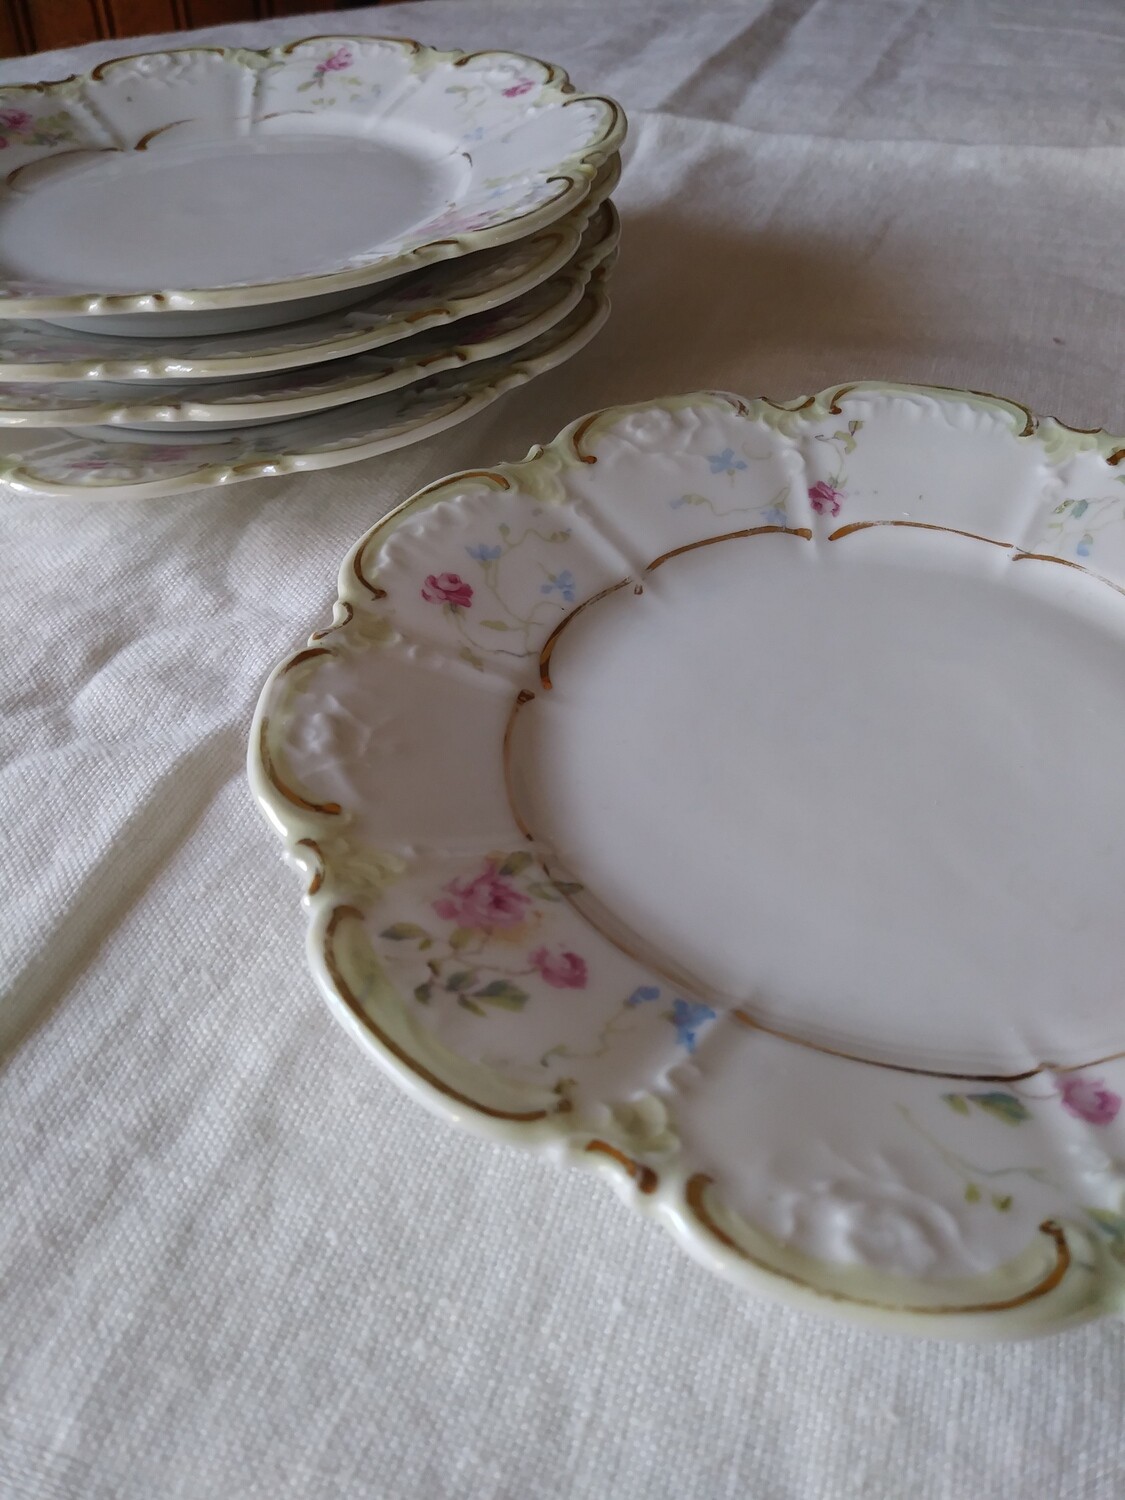 6 Vintage 6" dia. floral and gold metallic plates. Very shabby chic.